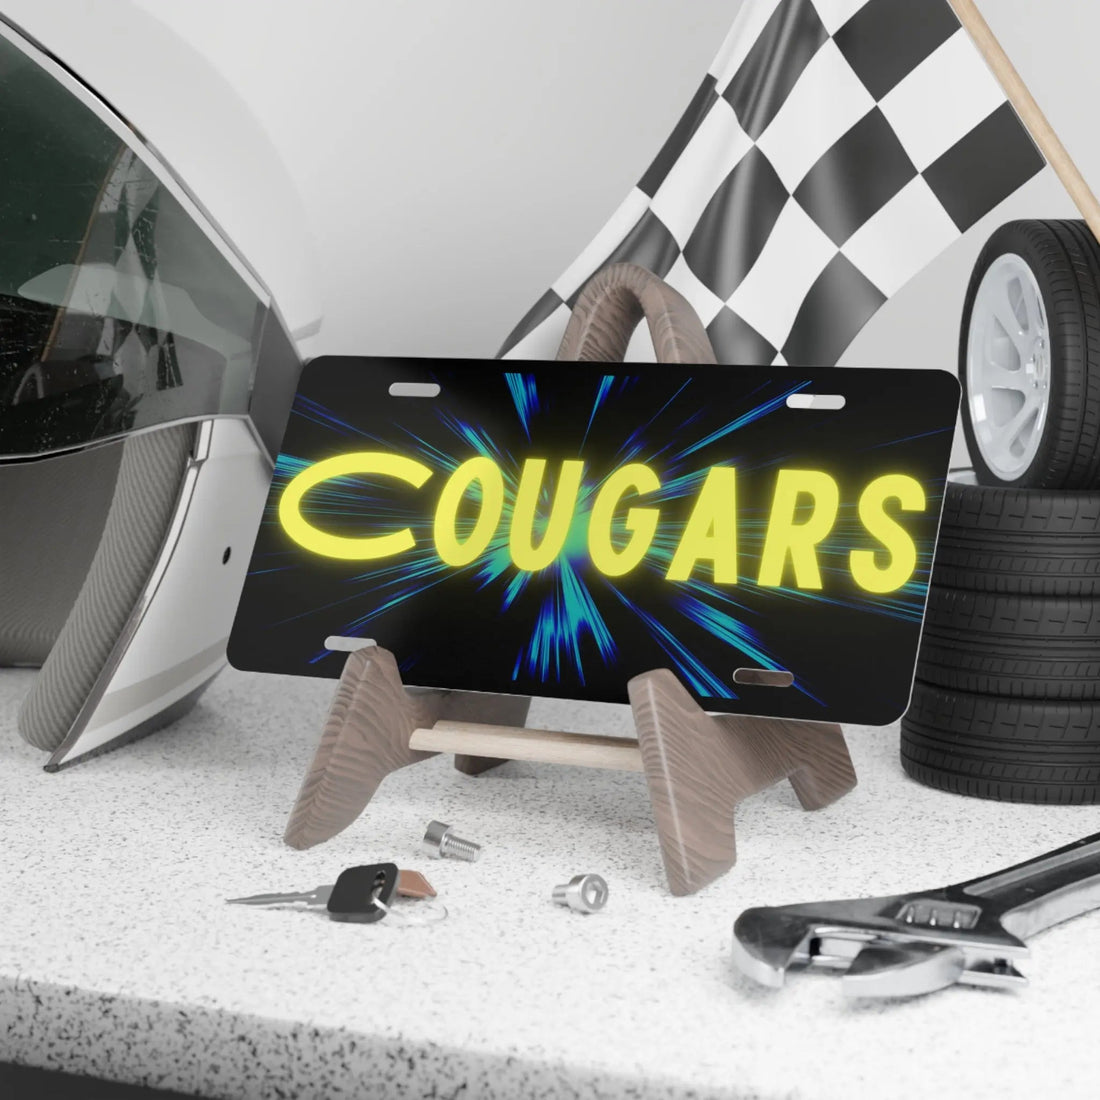 Cougars Beam License Plate - Accessories - Positively Sassy - Cougars Beam License Plate